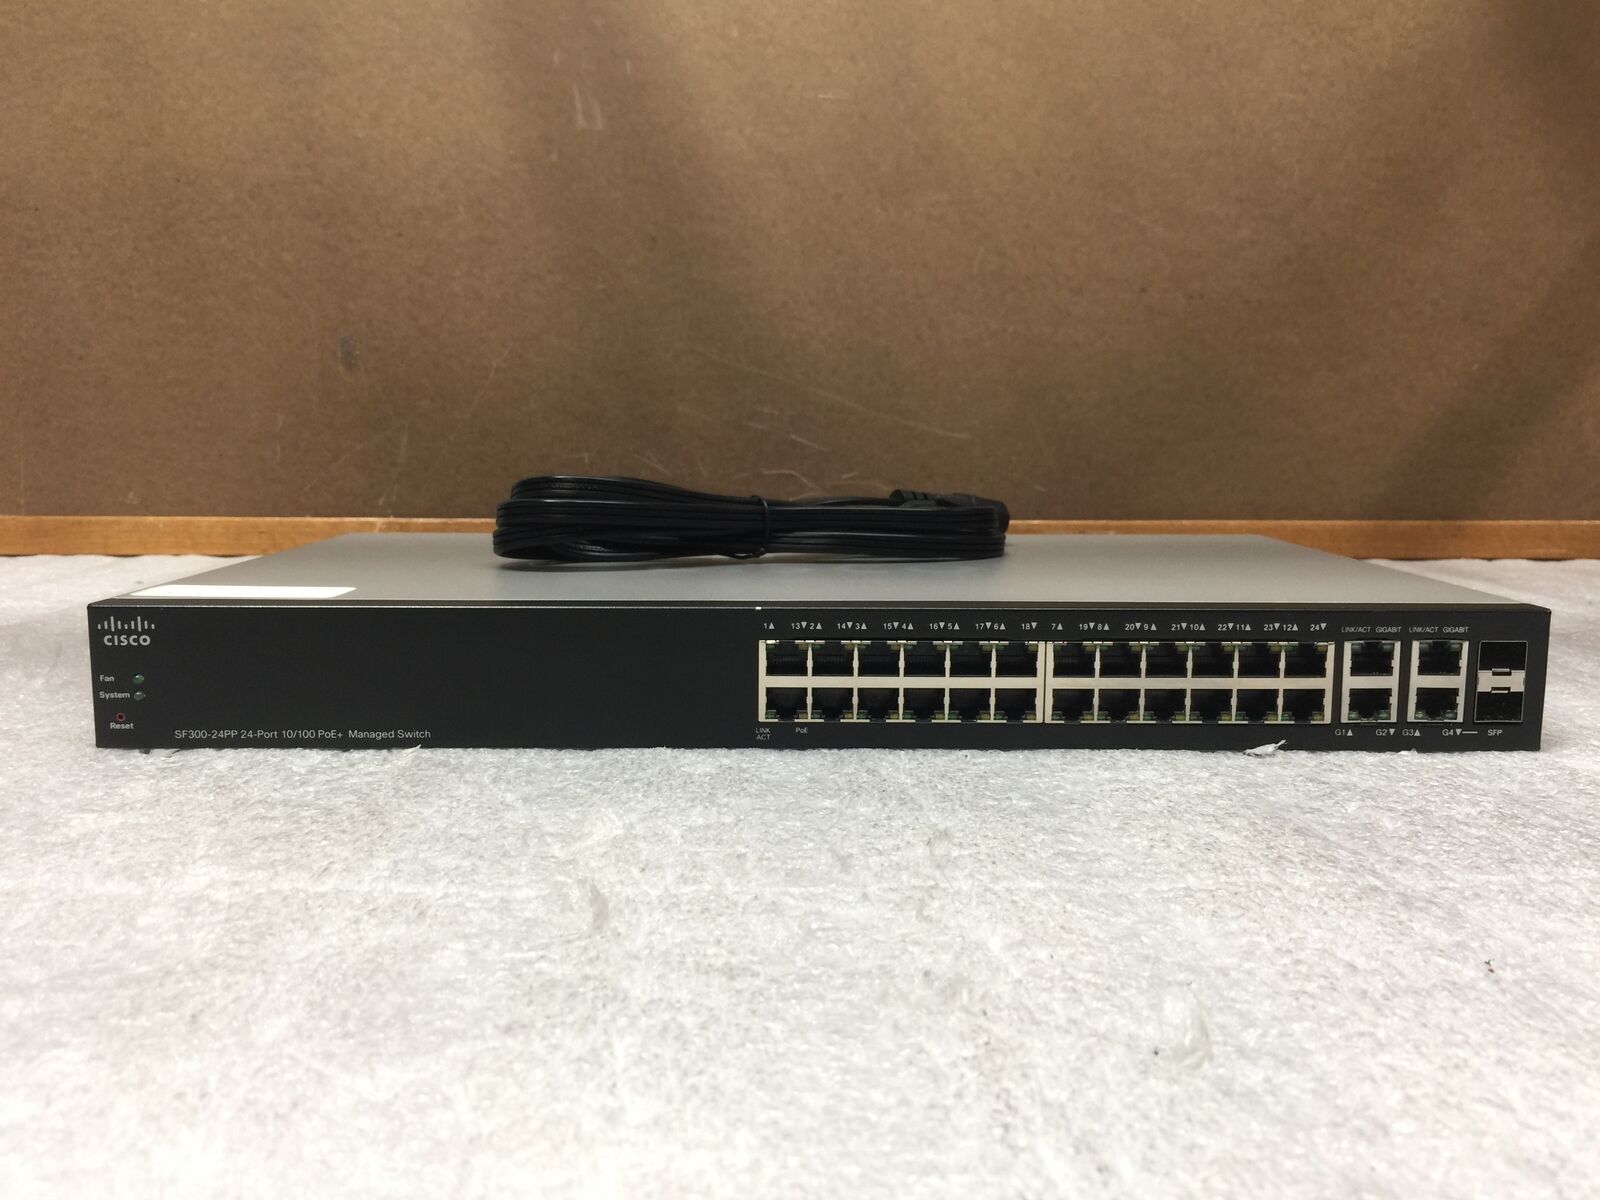 Cisco Small Business 300 SF300-24PP 24 Port PoE+ Managed Switch TESTED RESET